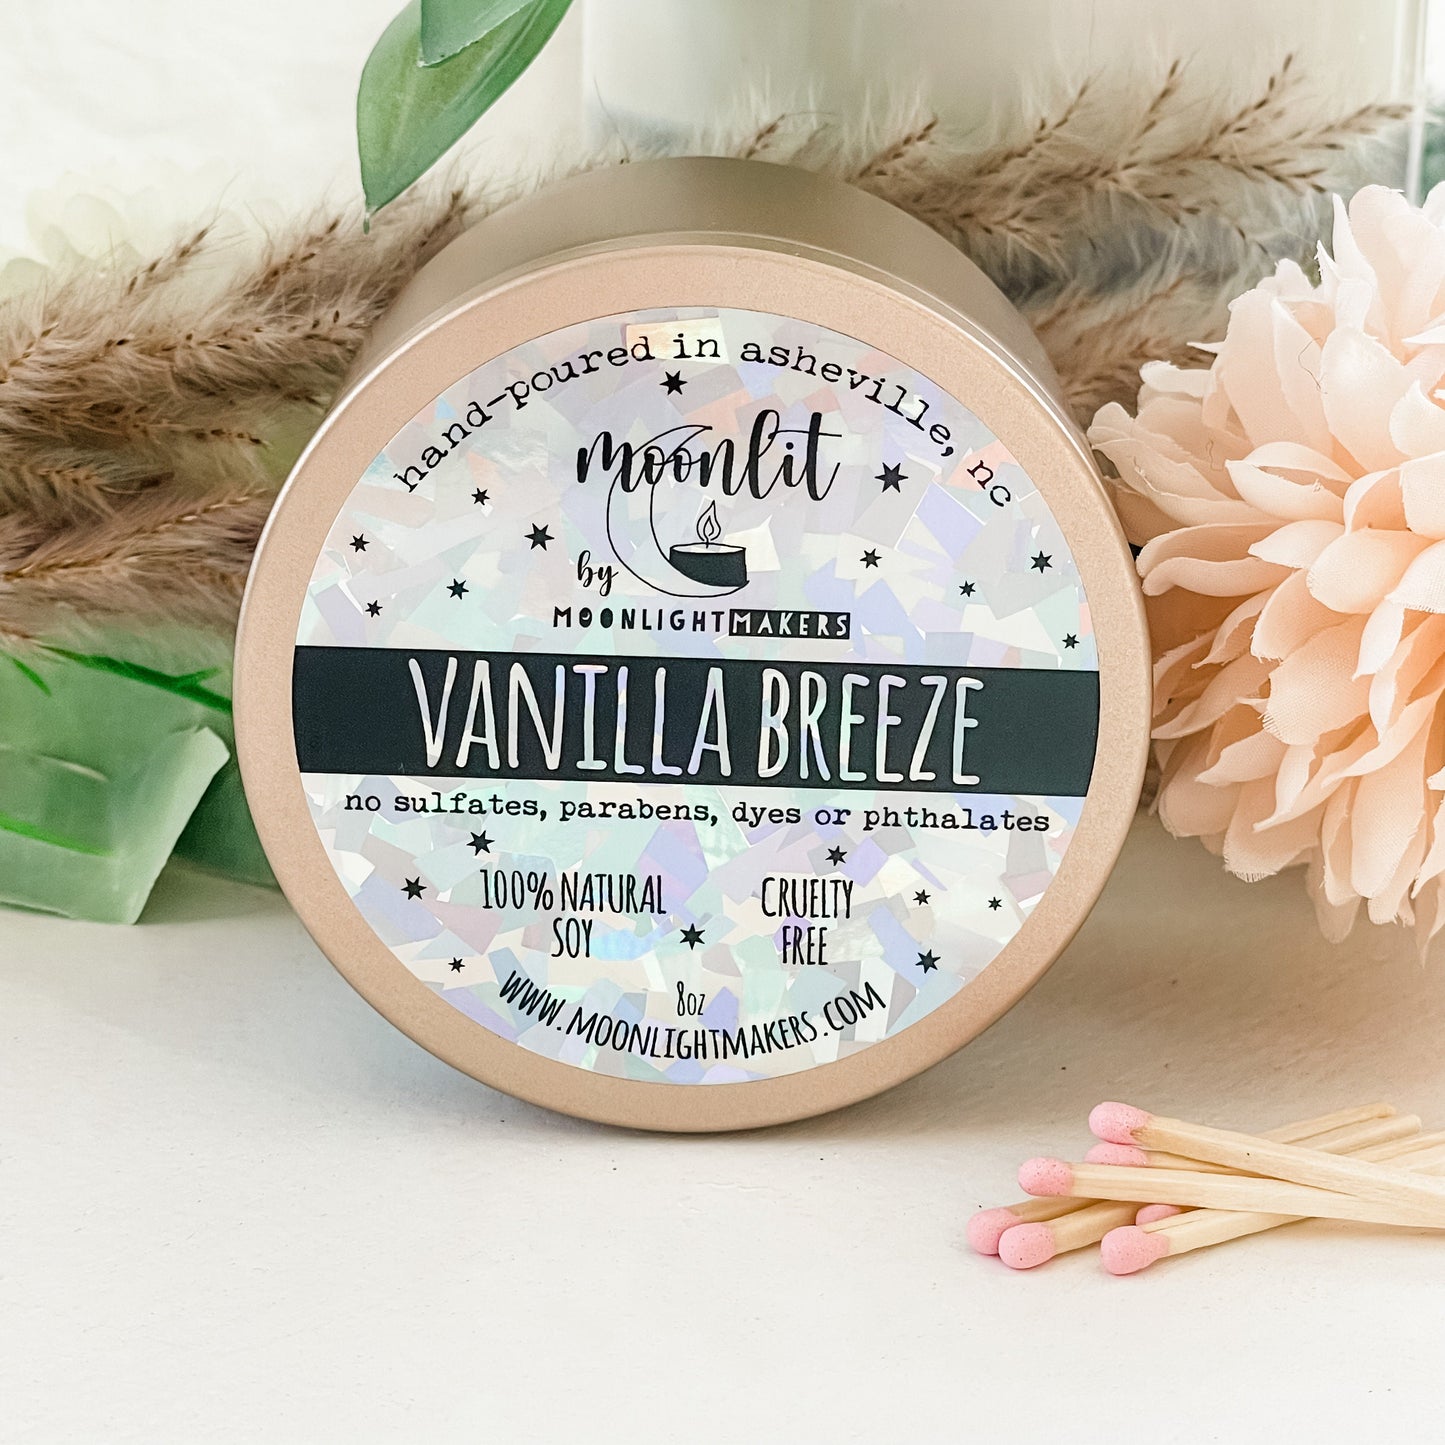 Happy Birthday (Sprinkles) - 8oz Rose Gold Candle - Vanilla Breeze - 100% Natural Soy Wax